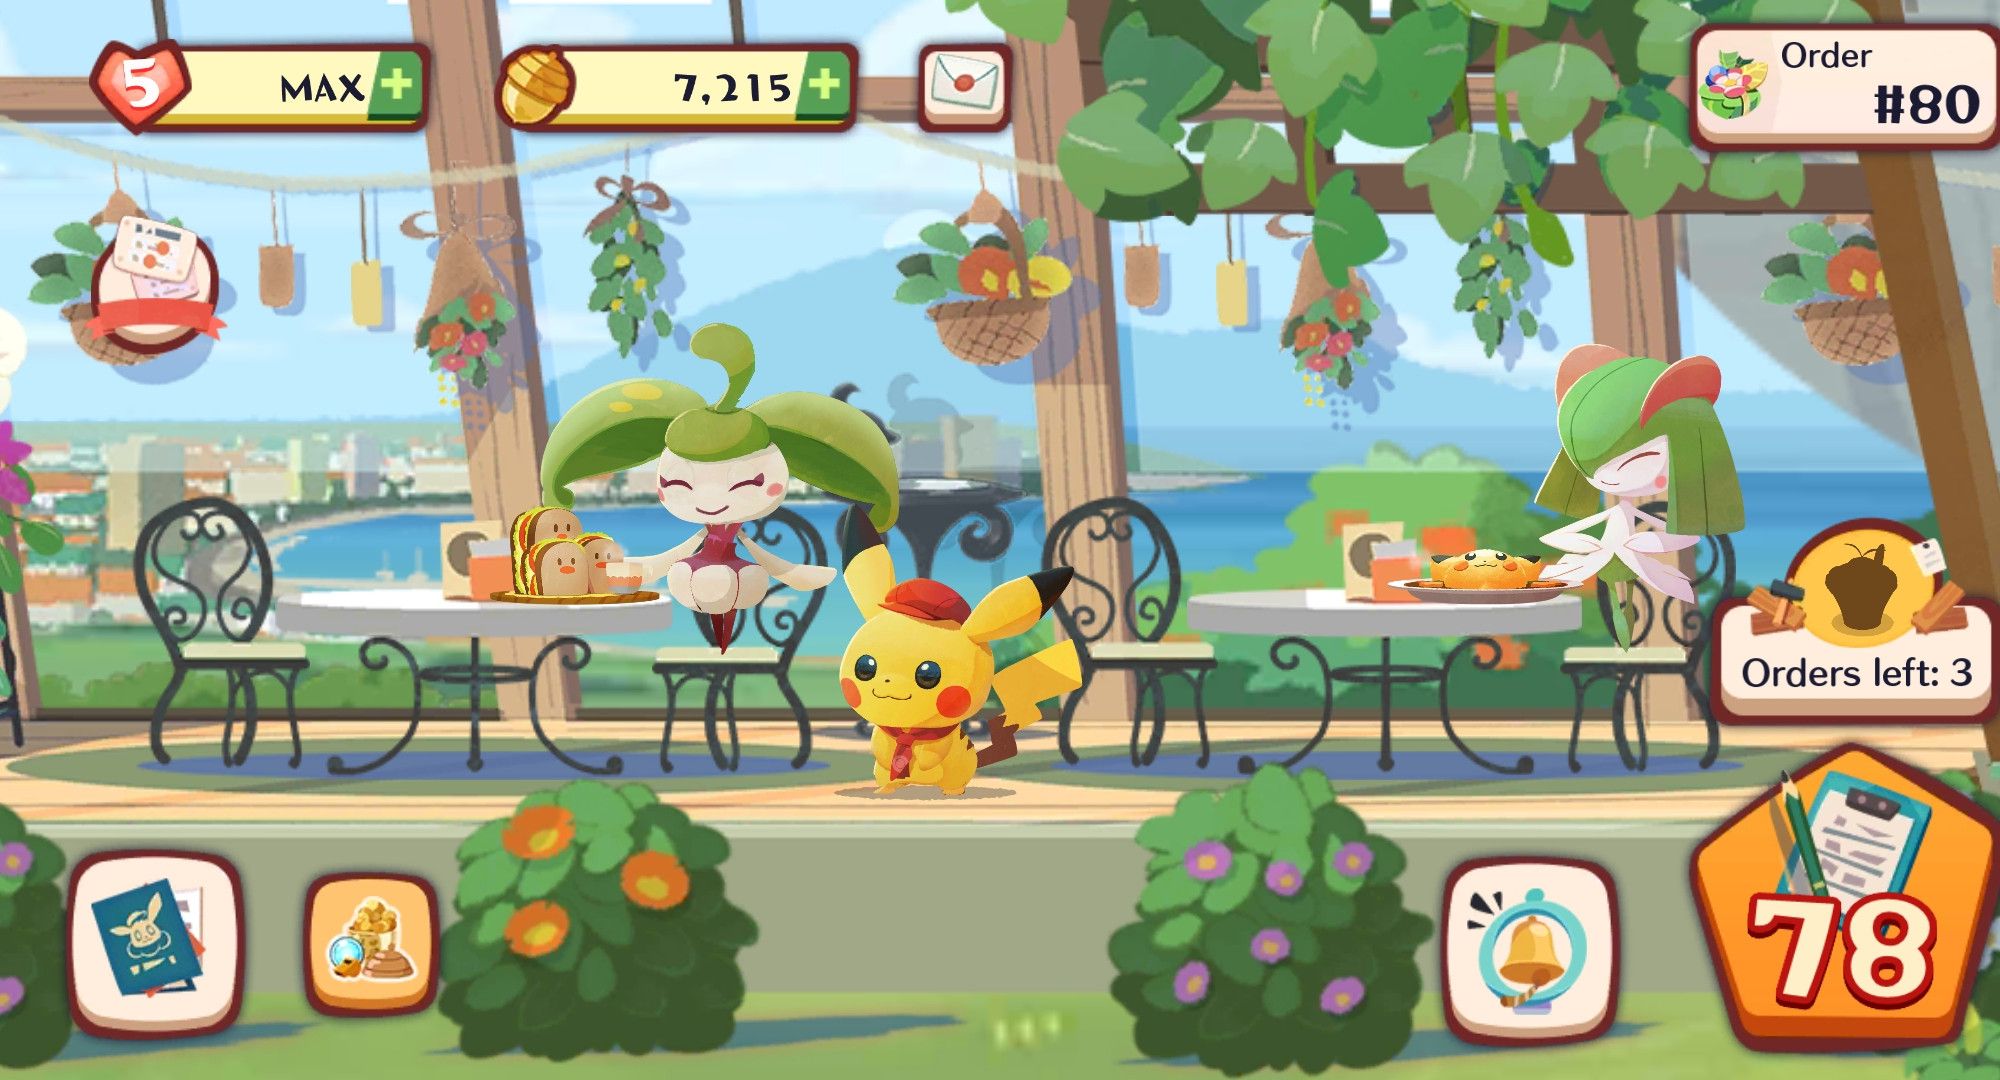 An image of Pikachu attending the cafe in Pokémon Cafe Mix.